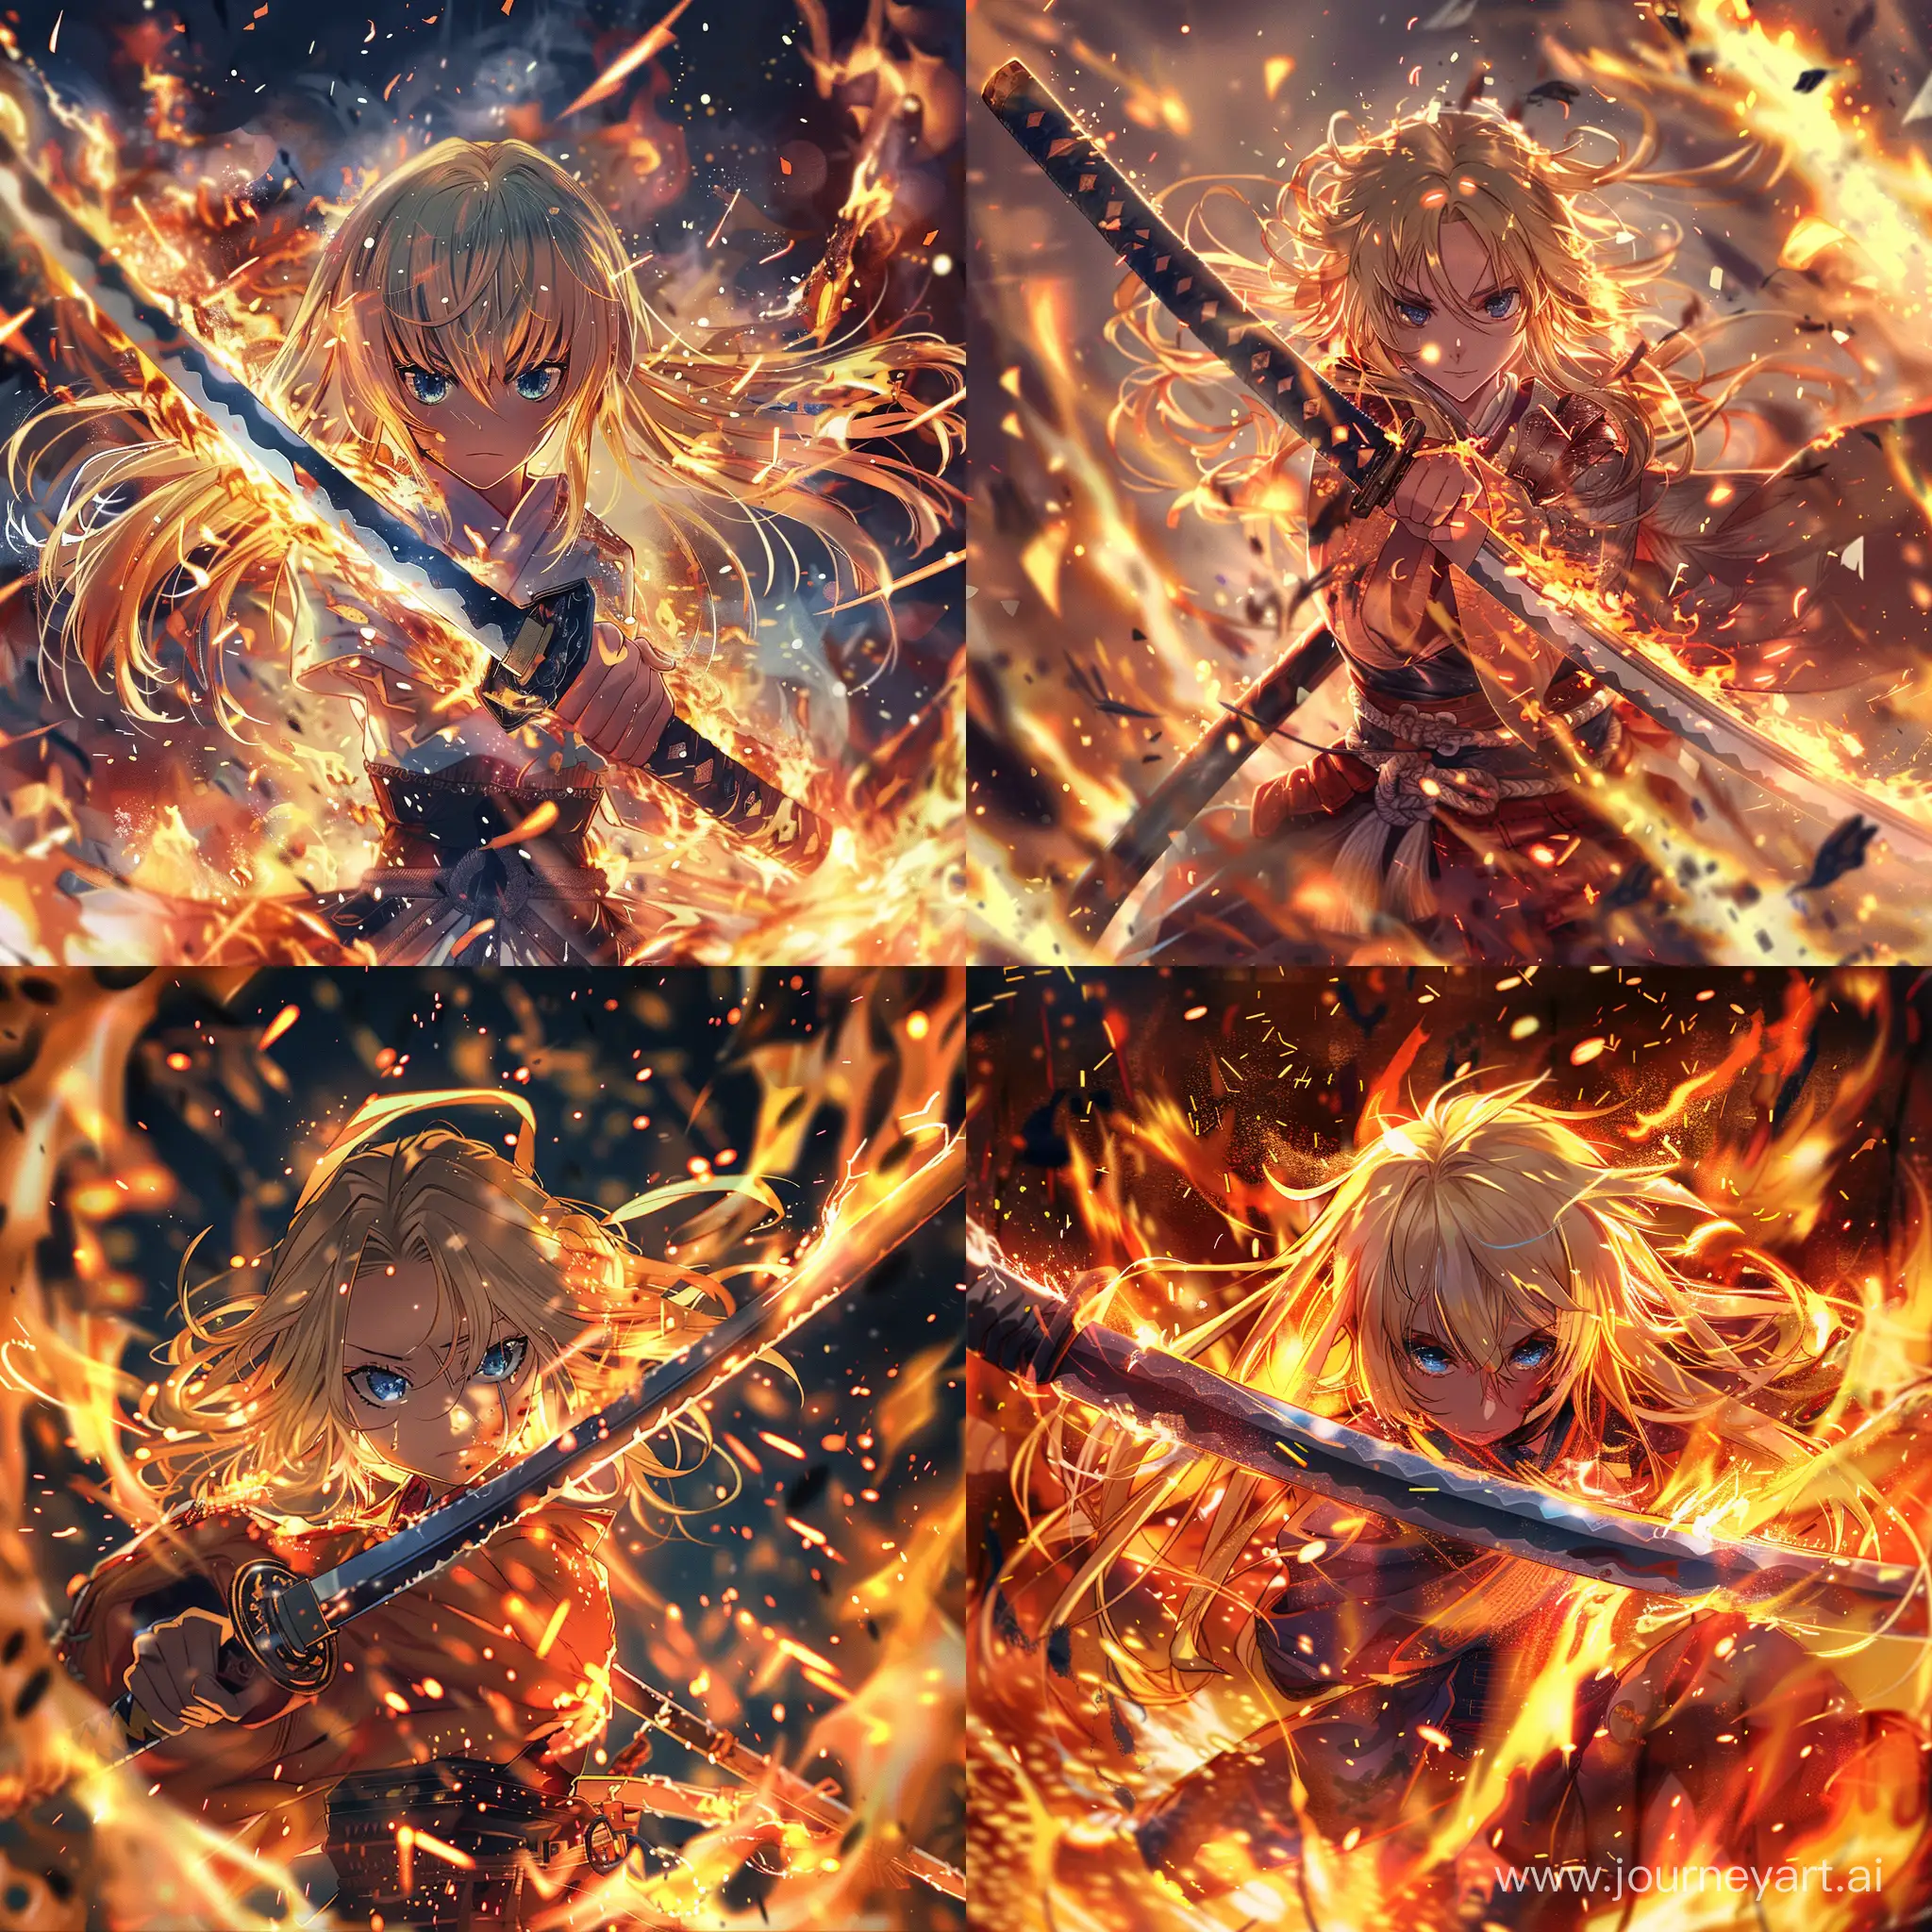 The image of a katana (Japanese weapon) in the embrace of flames, sparks. The katana is held by a girl with blonde hair and blue eyes. A girl with a katana in the middle, and fire behind them and on the sides. Detailed, use for an avatar. Definitely in the anime style